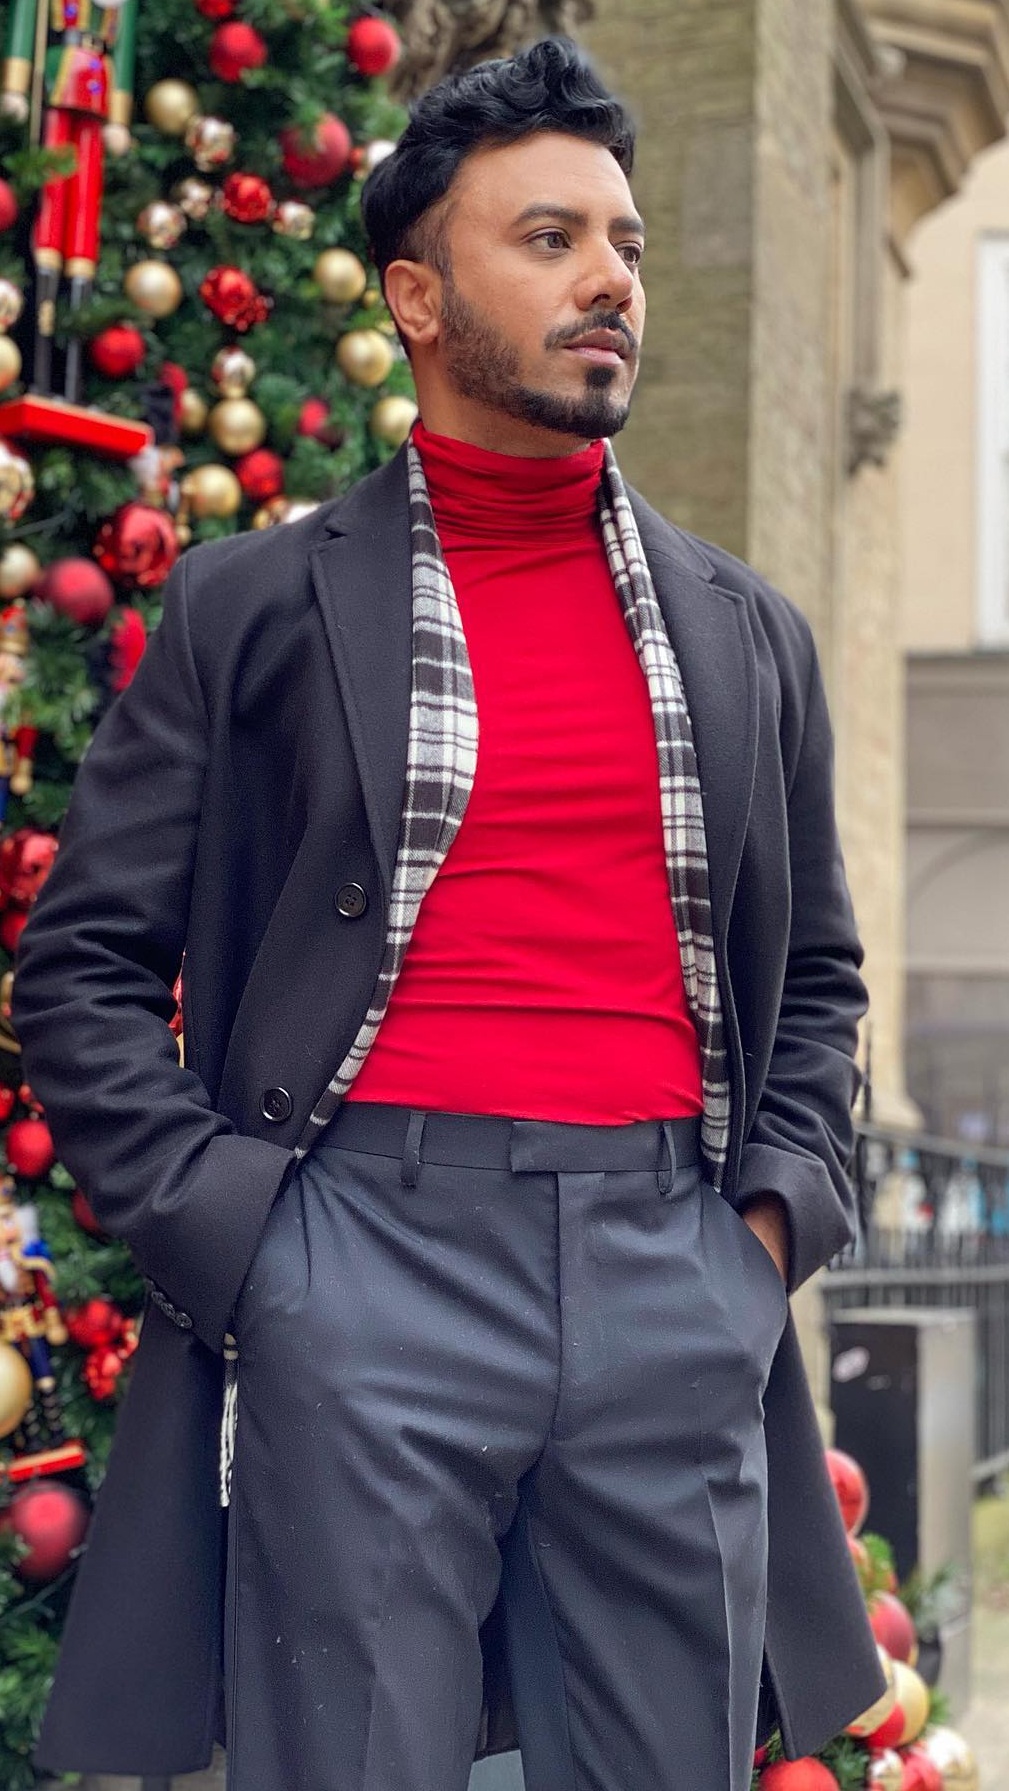 How to wear a Jacket for Christmas - Christmas Outfits for Men